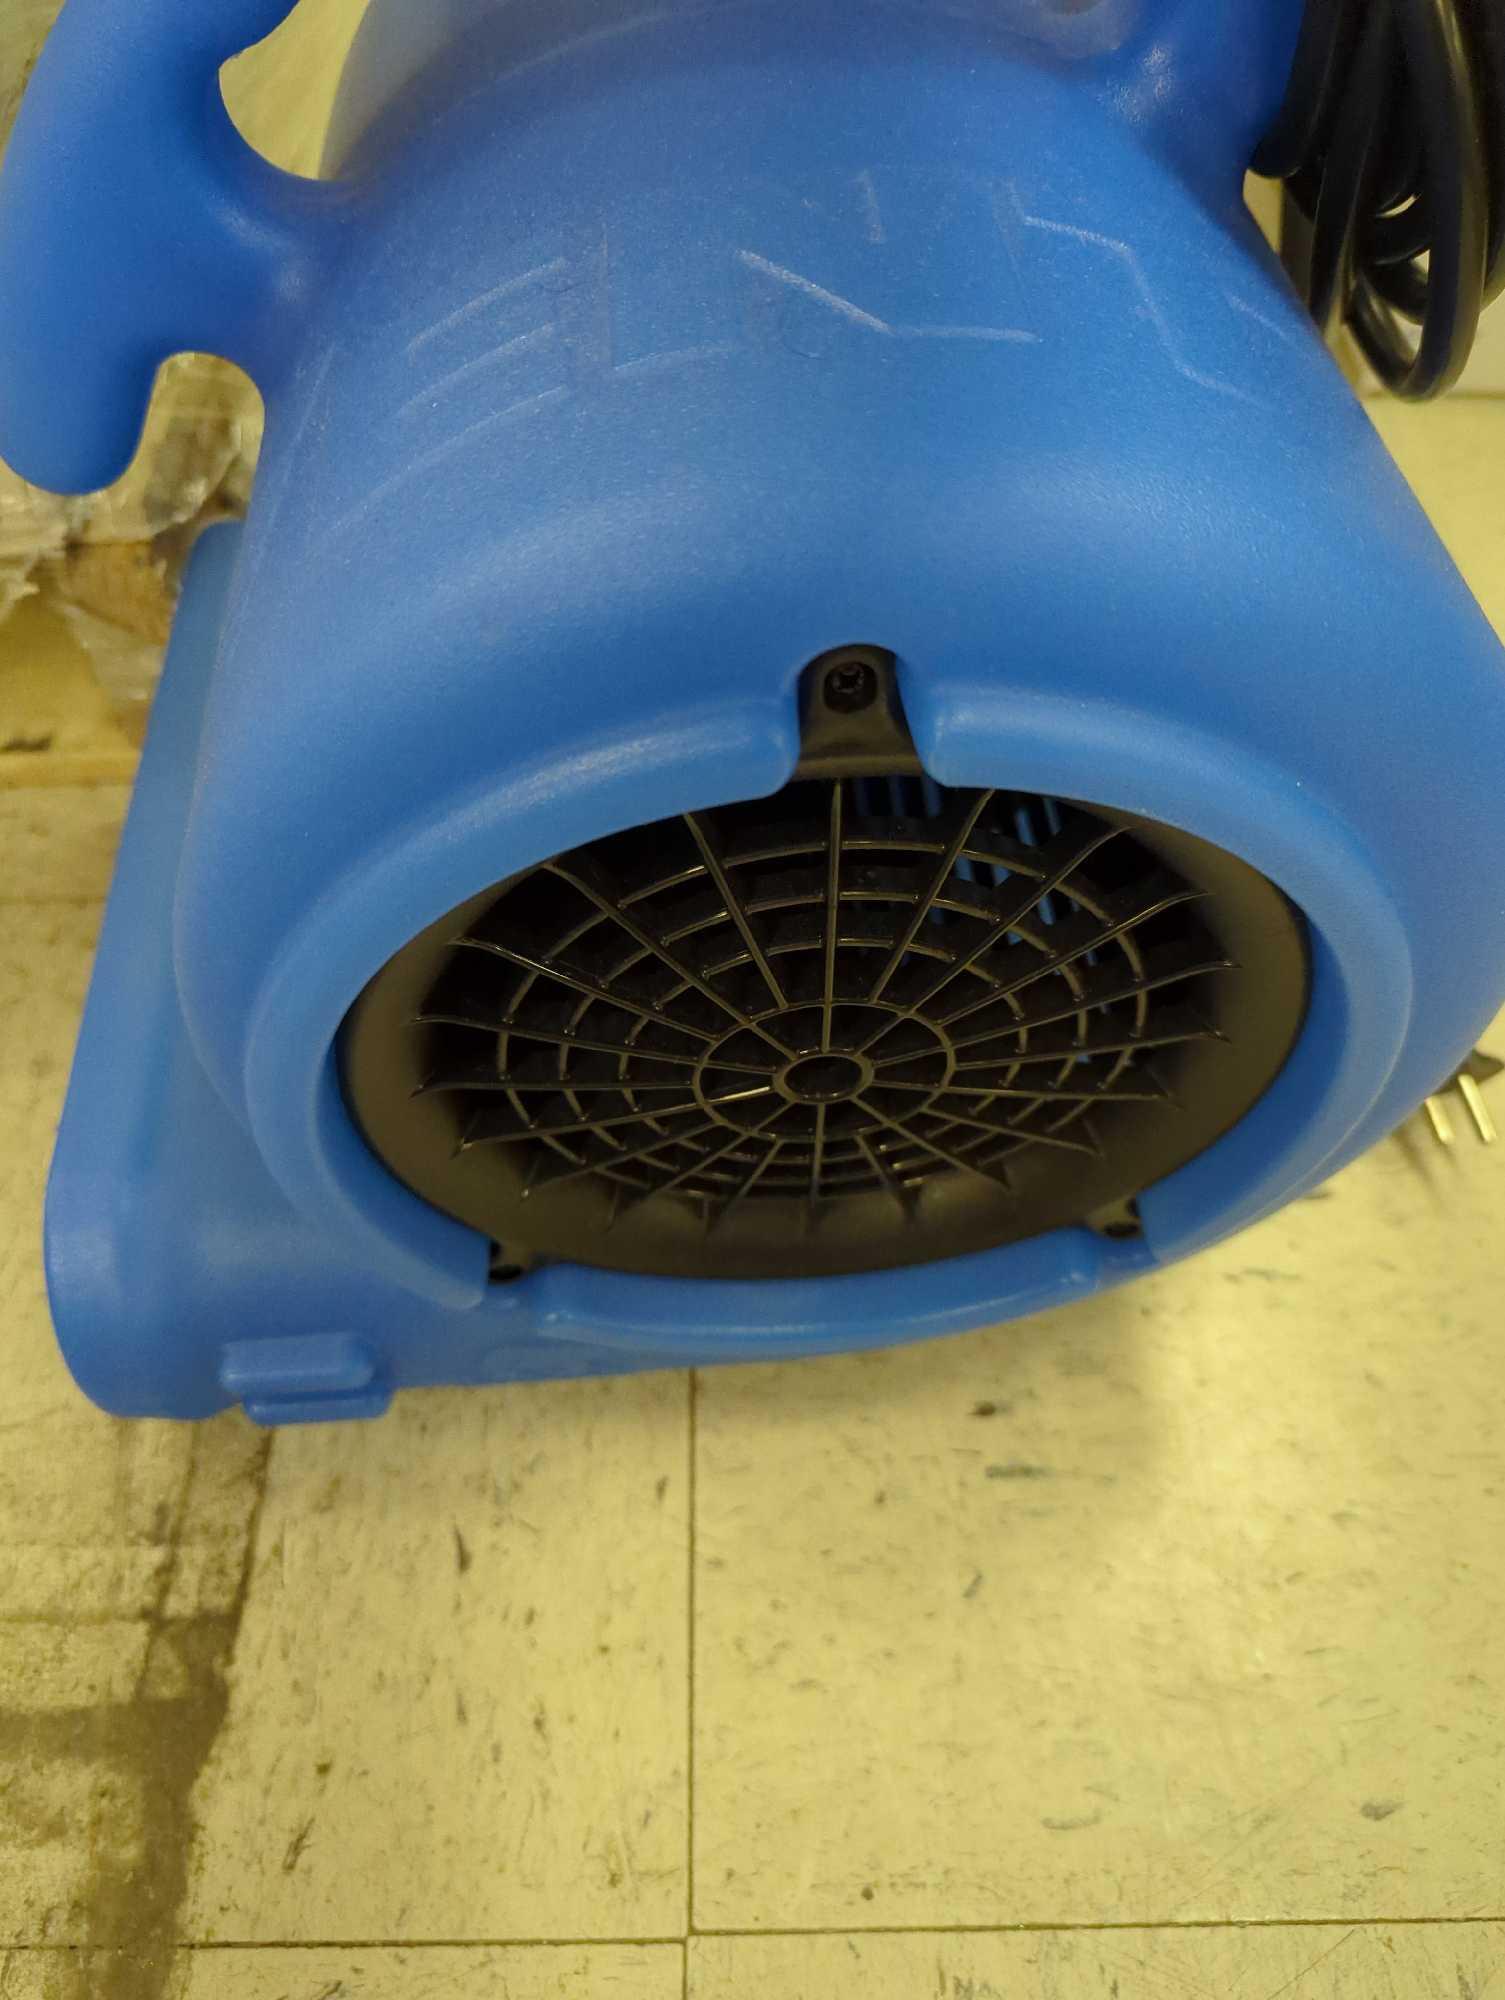 B-Air 1/4 HP Air Mover Blower Fan for Water Damage Restoration Carpet Dryer Floor Home and Plumbing